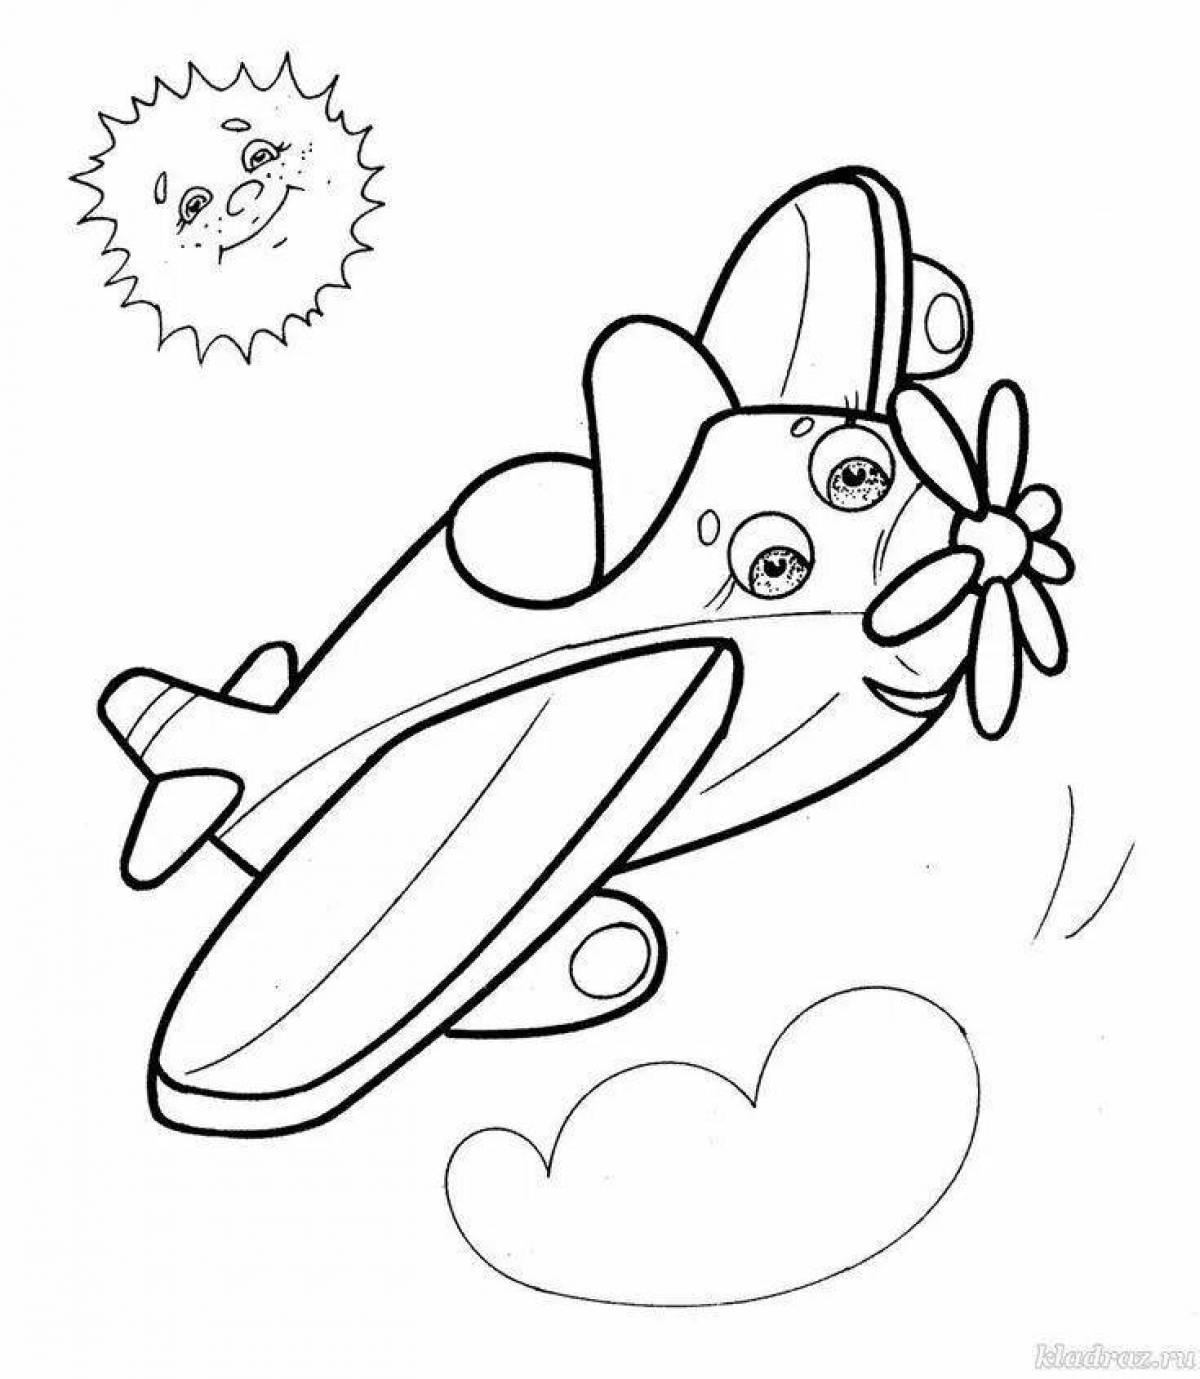 Fun airplane coloring book for 3-4 year olds